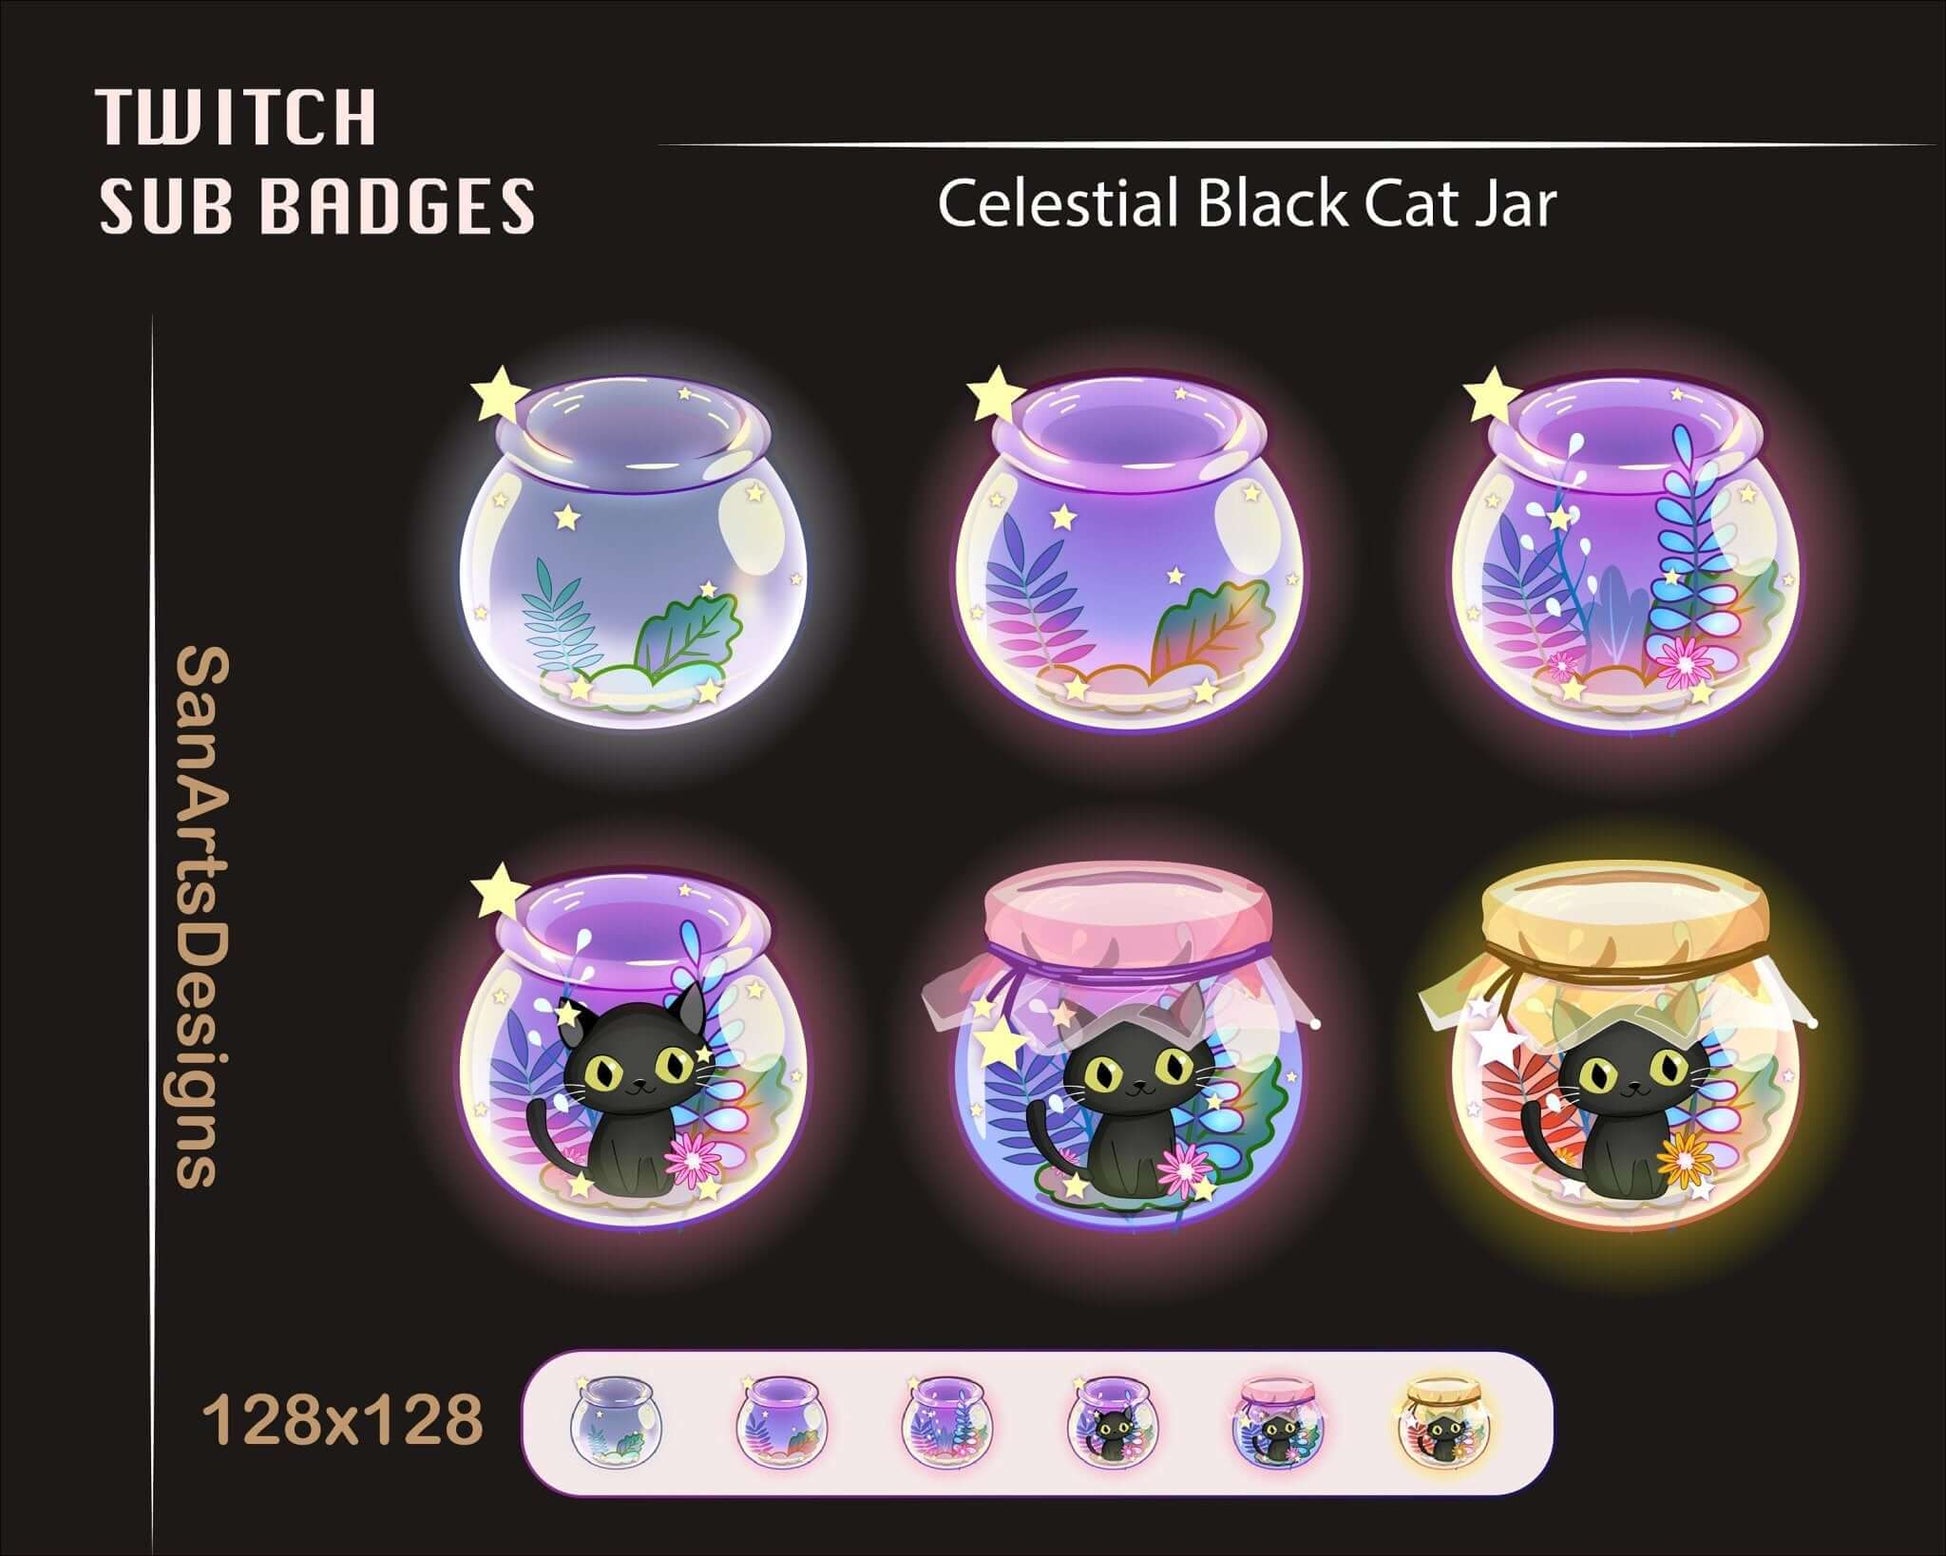 Cute Black and White Cat in Celestial Jar Twitch Sub Badges - Badges - Stream K-Arts